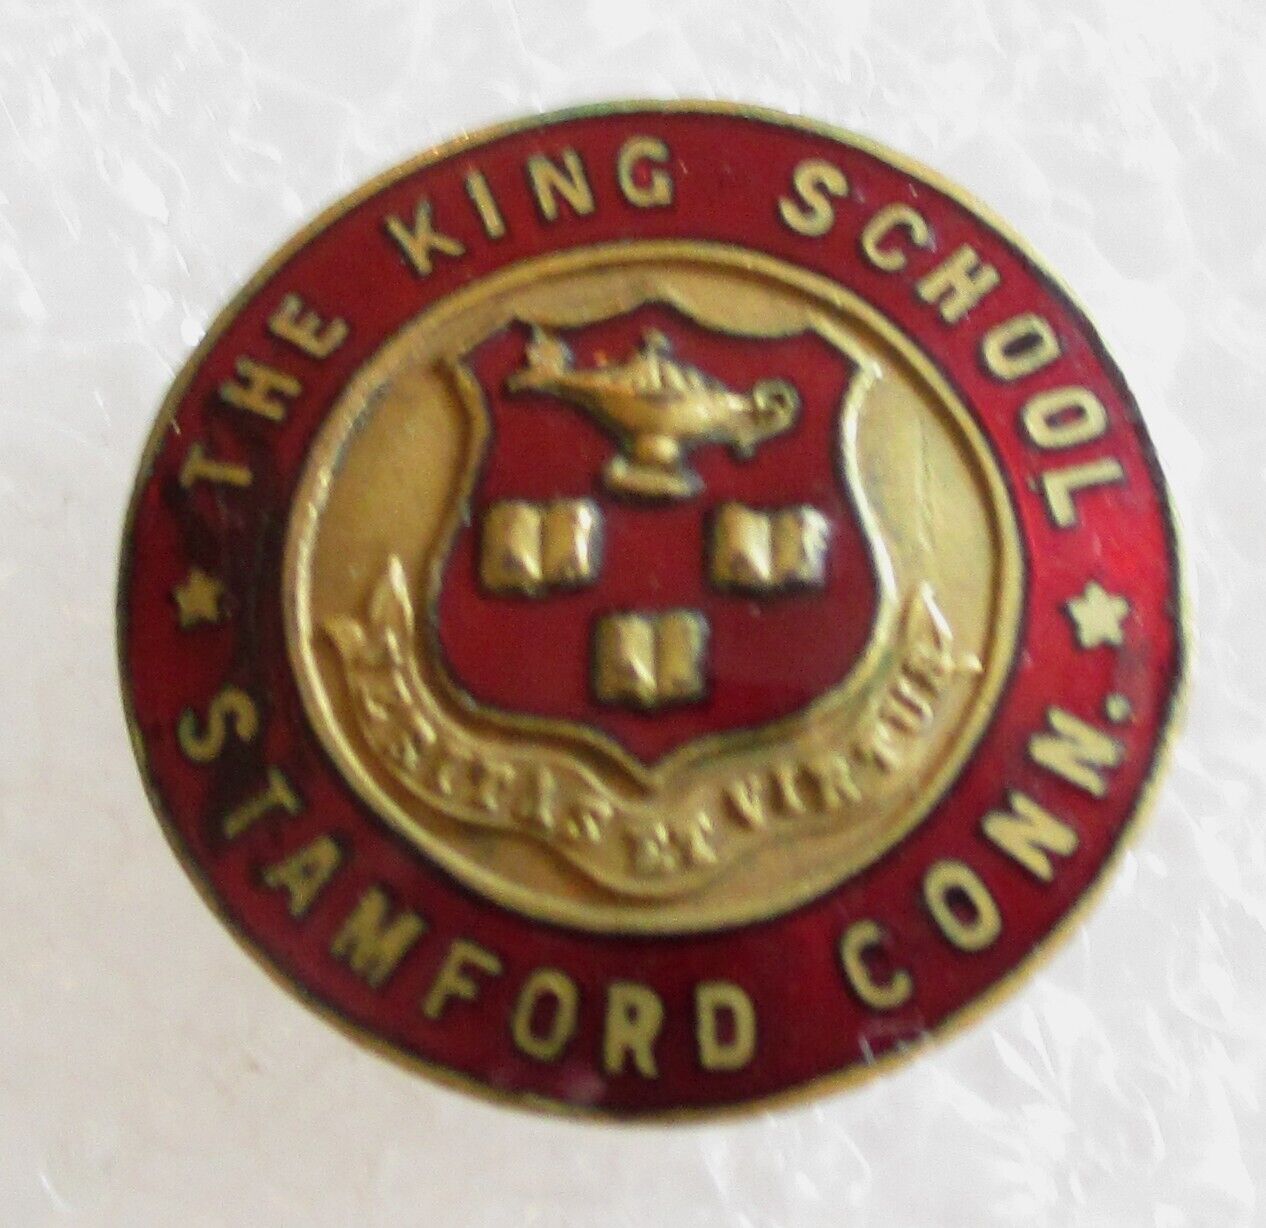 Antique The King School - Stamford, Connecticut Student Class Pin